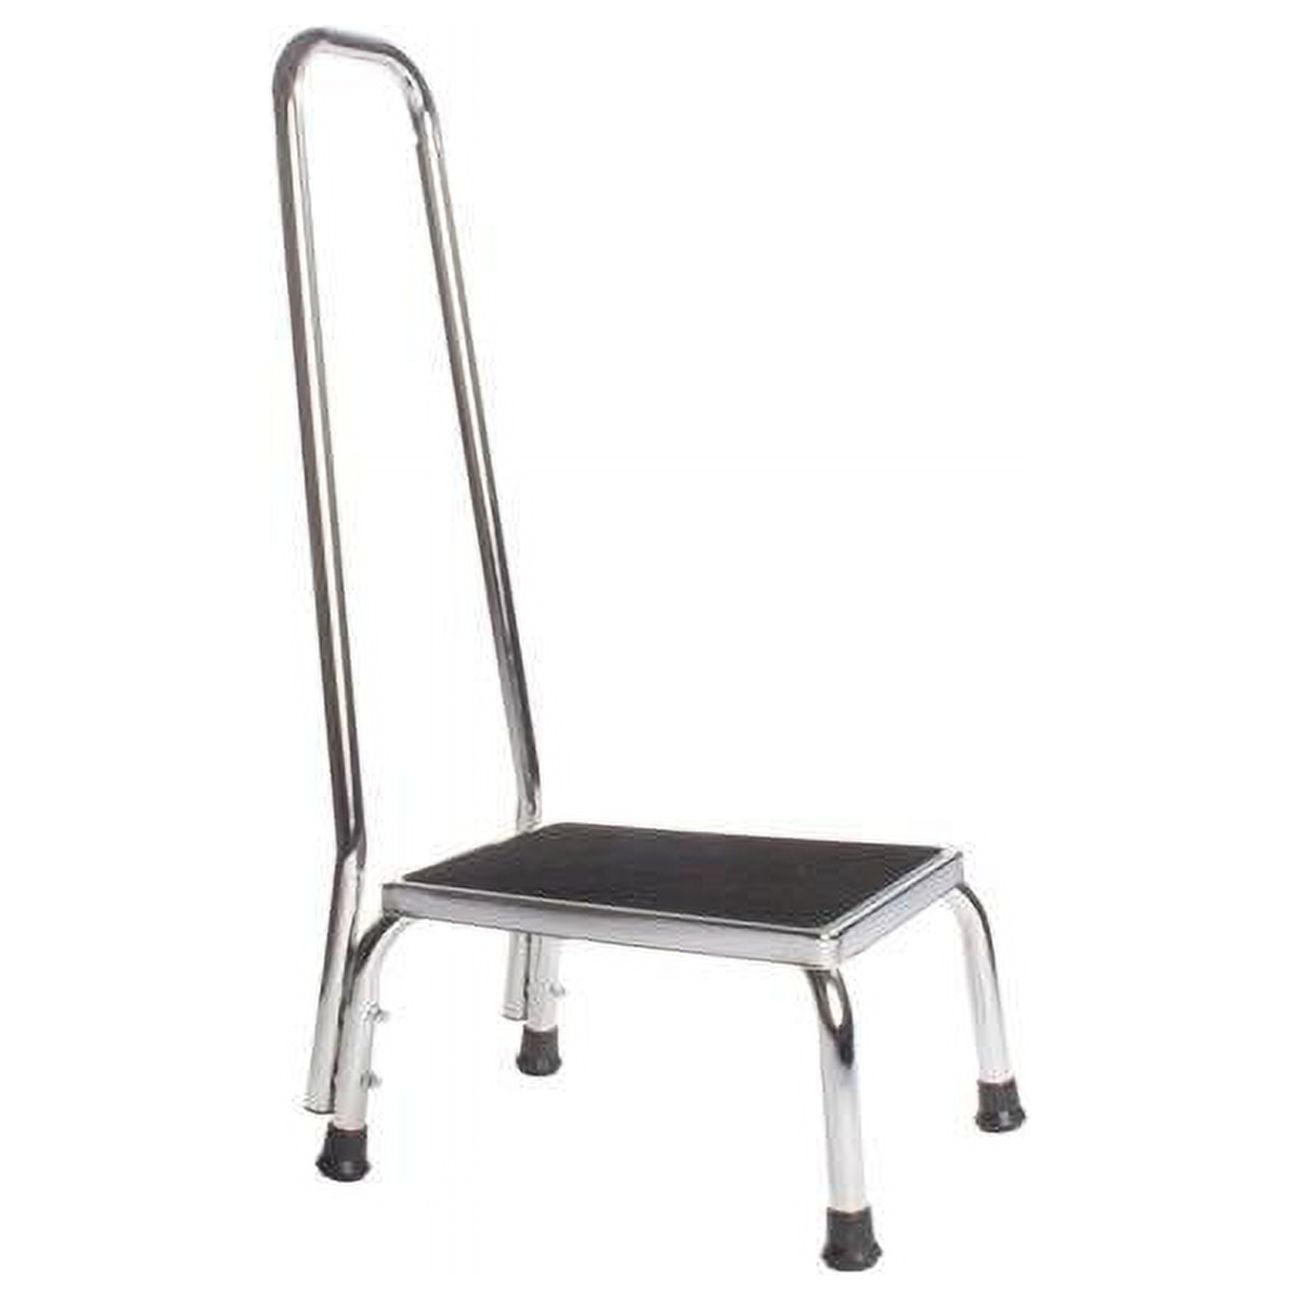 4349 Foot Stool With Handrail, Chrome